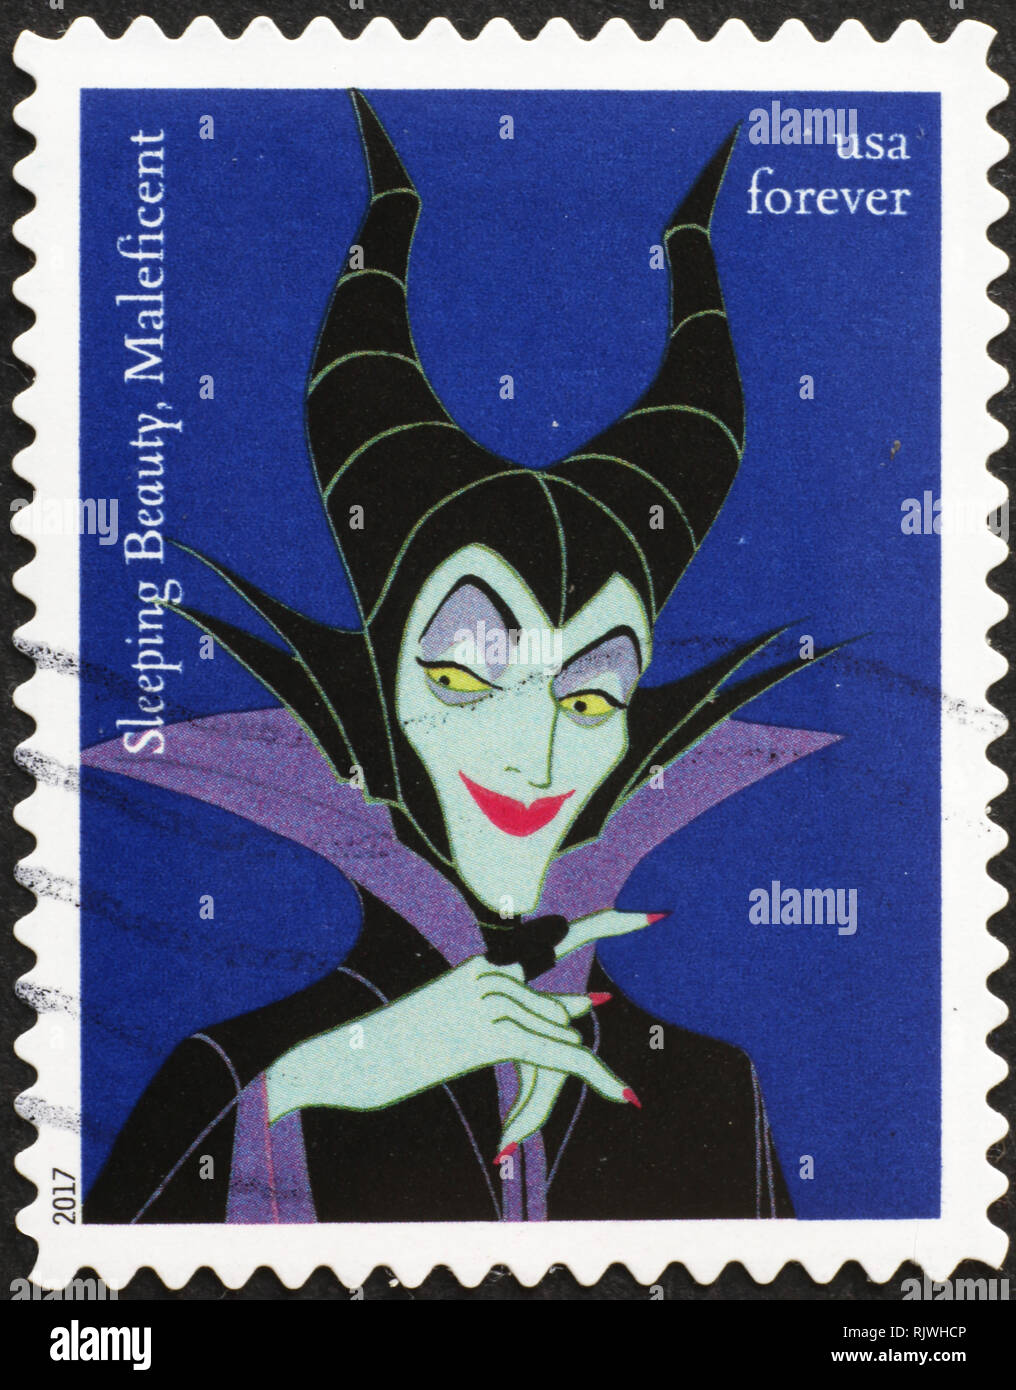 Witch Maleficent from Sleeping Beauty on american stamp Stock Photo